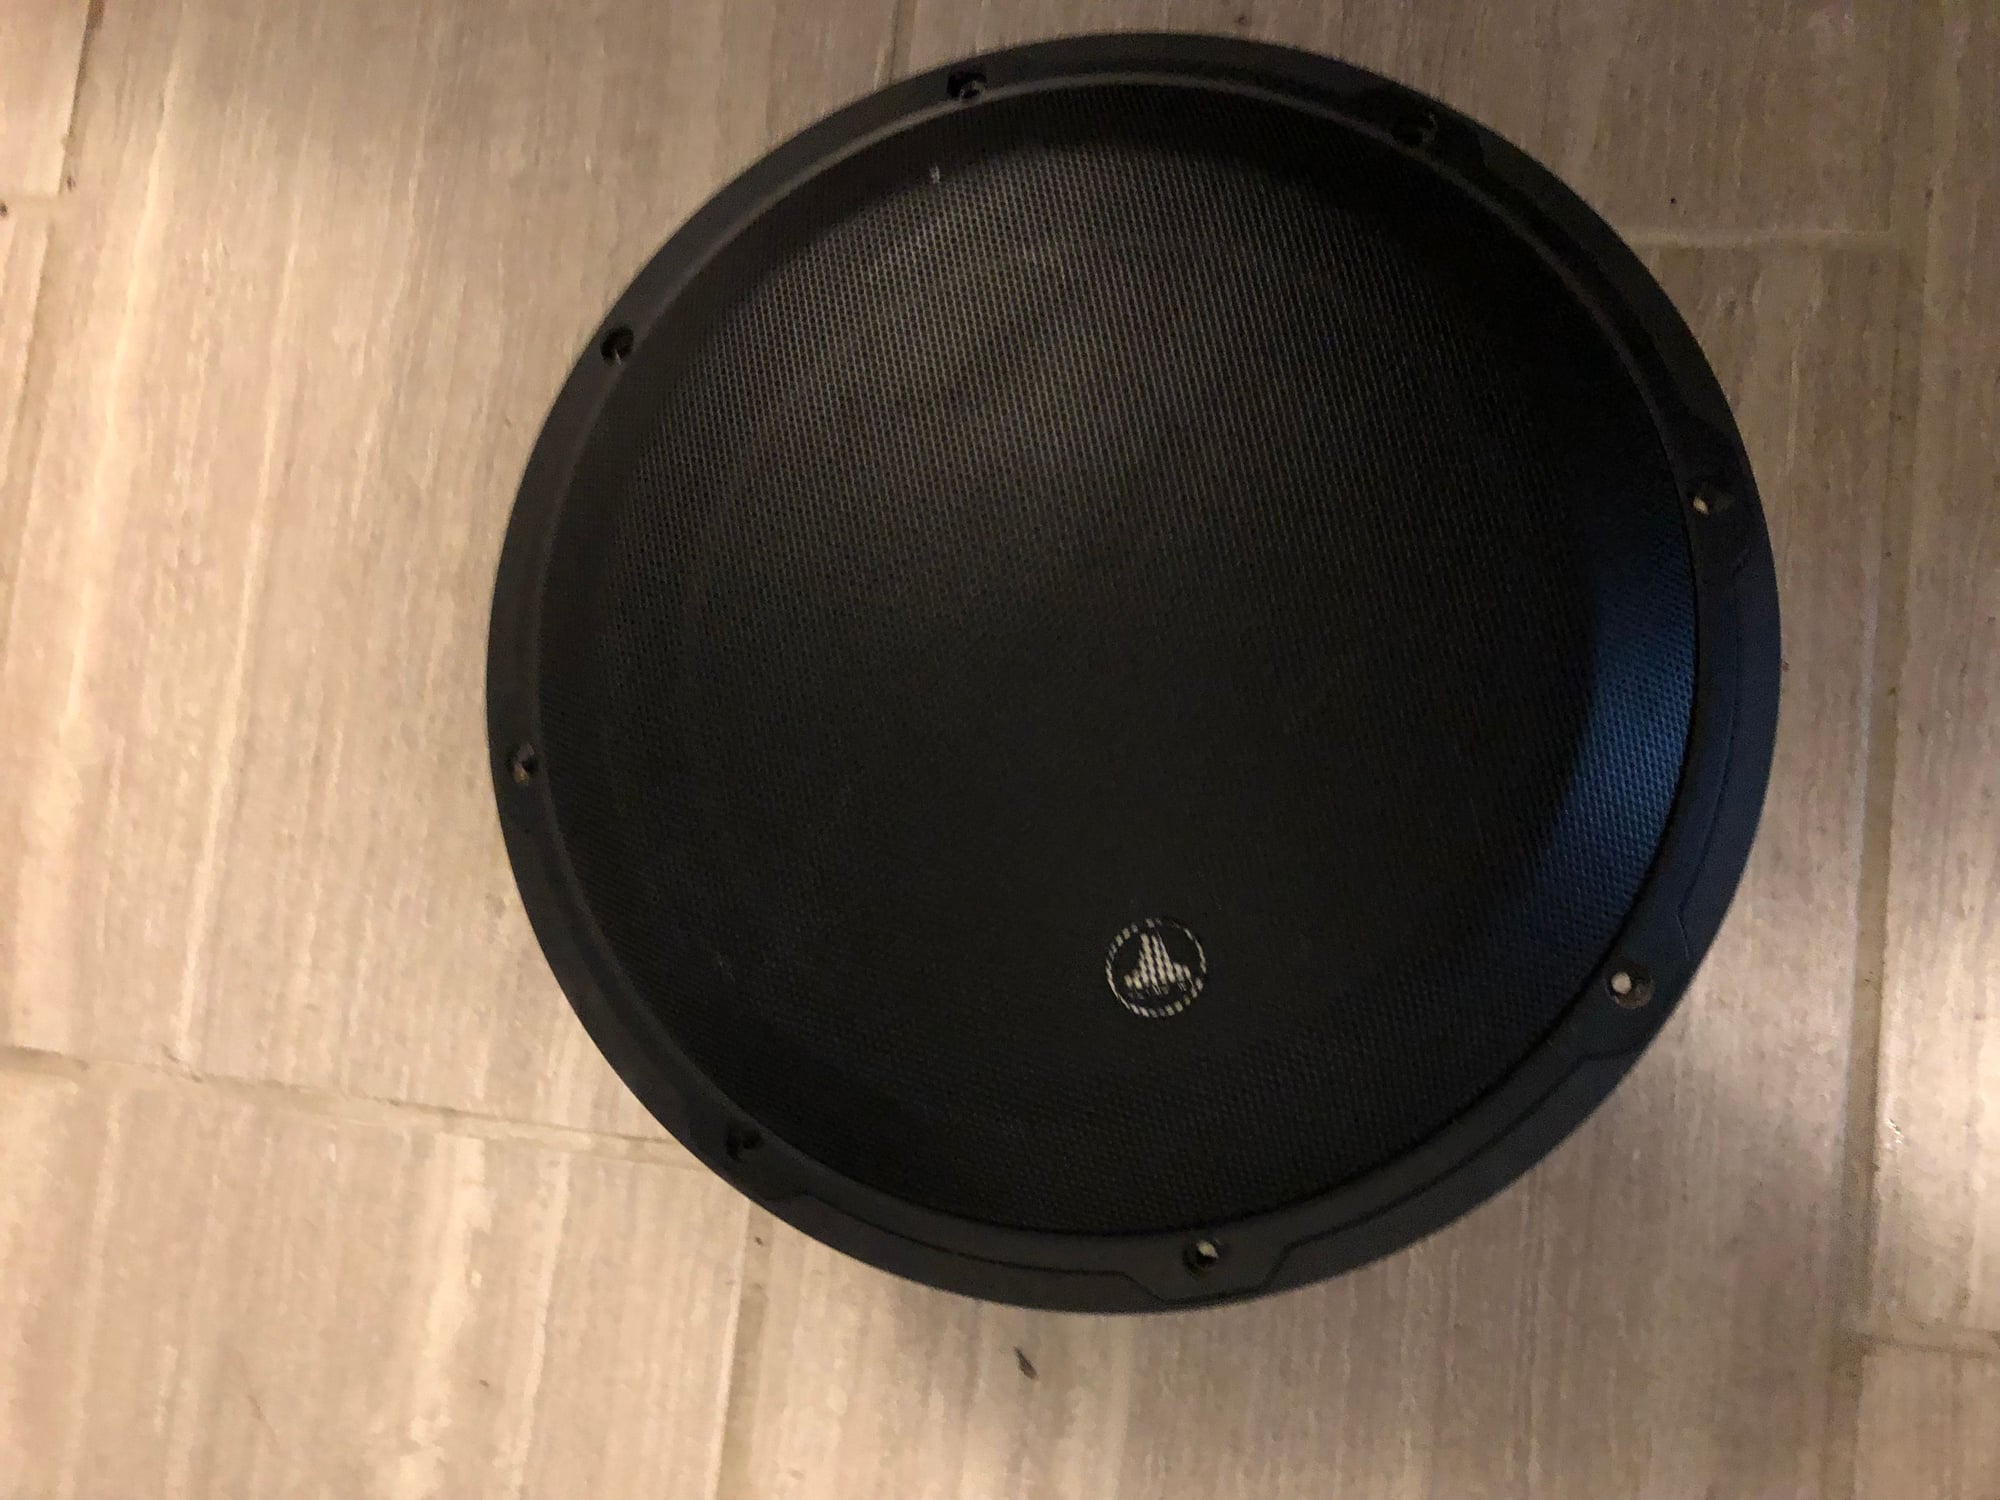 Audio Video/Electronics - Custom Made 10" Sub Enclosure and JBL woofer. - Used - 2014 to 2019 Lexus IS350 - 2014 to 2019 Lexus IS250 - Greenland, NH 03840, United States